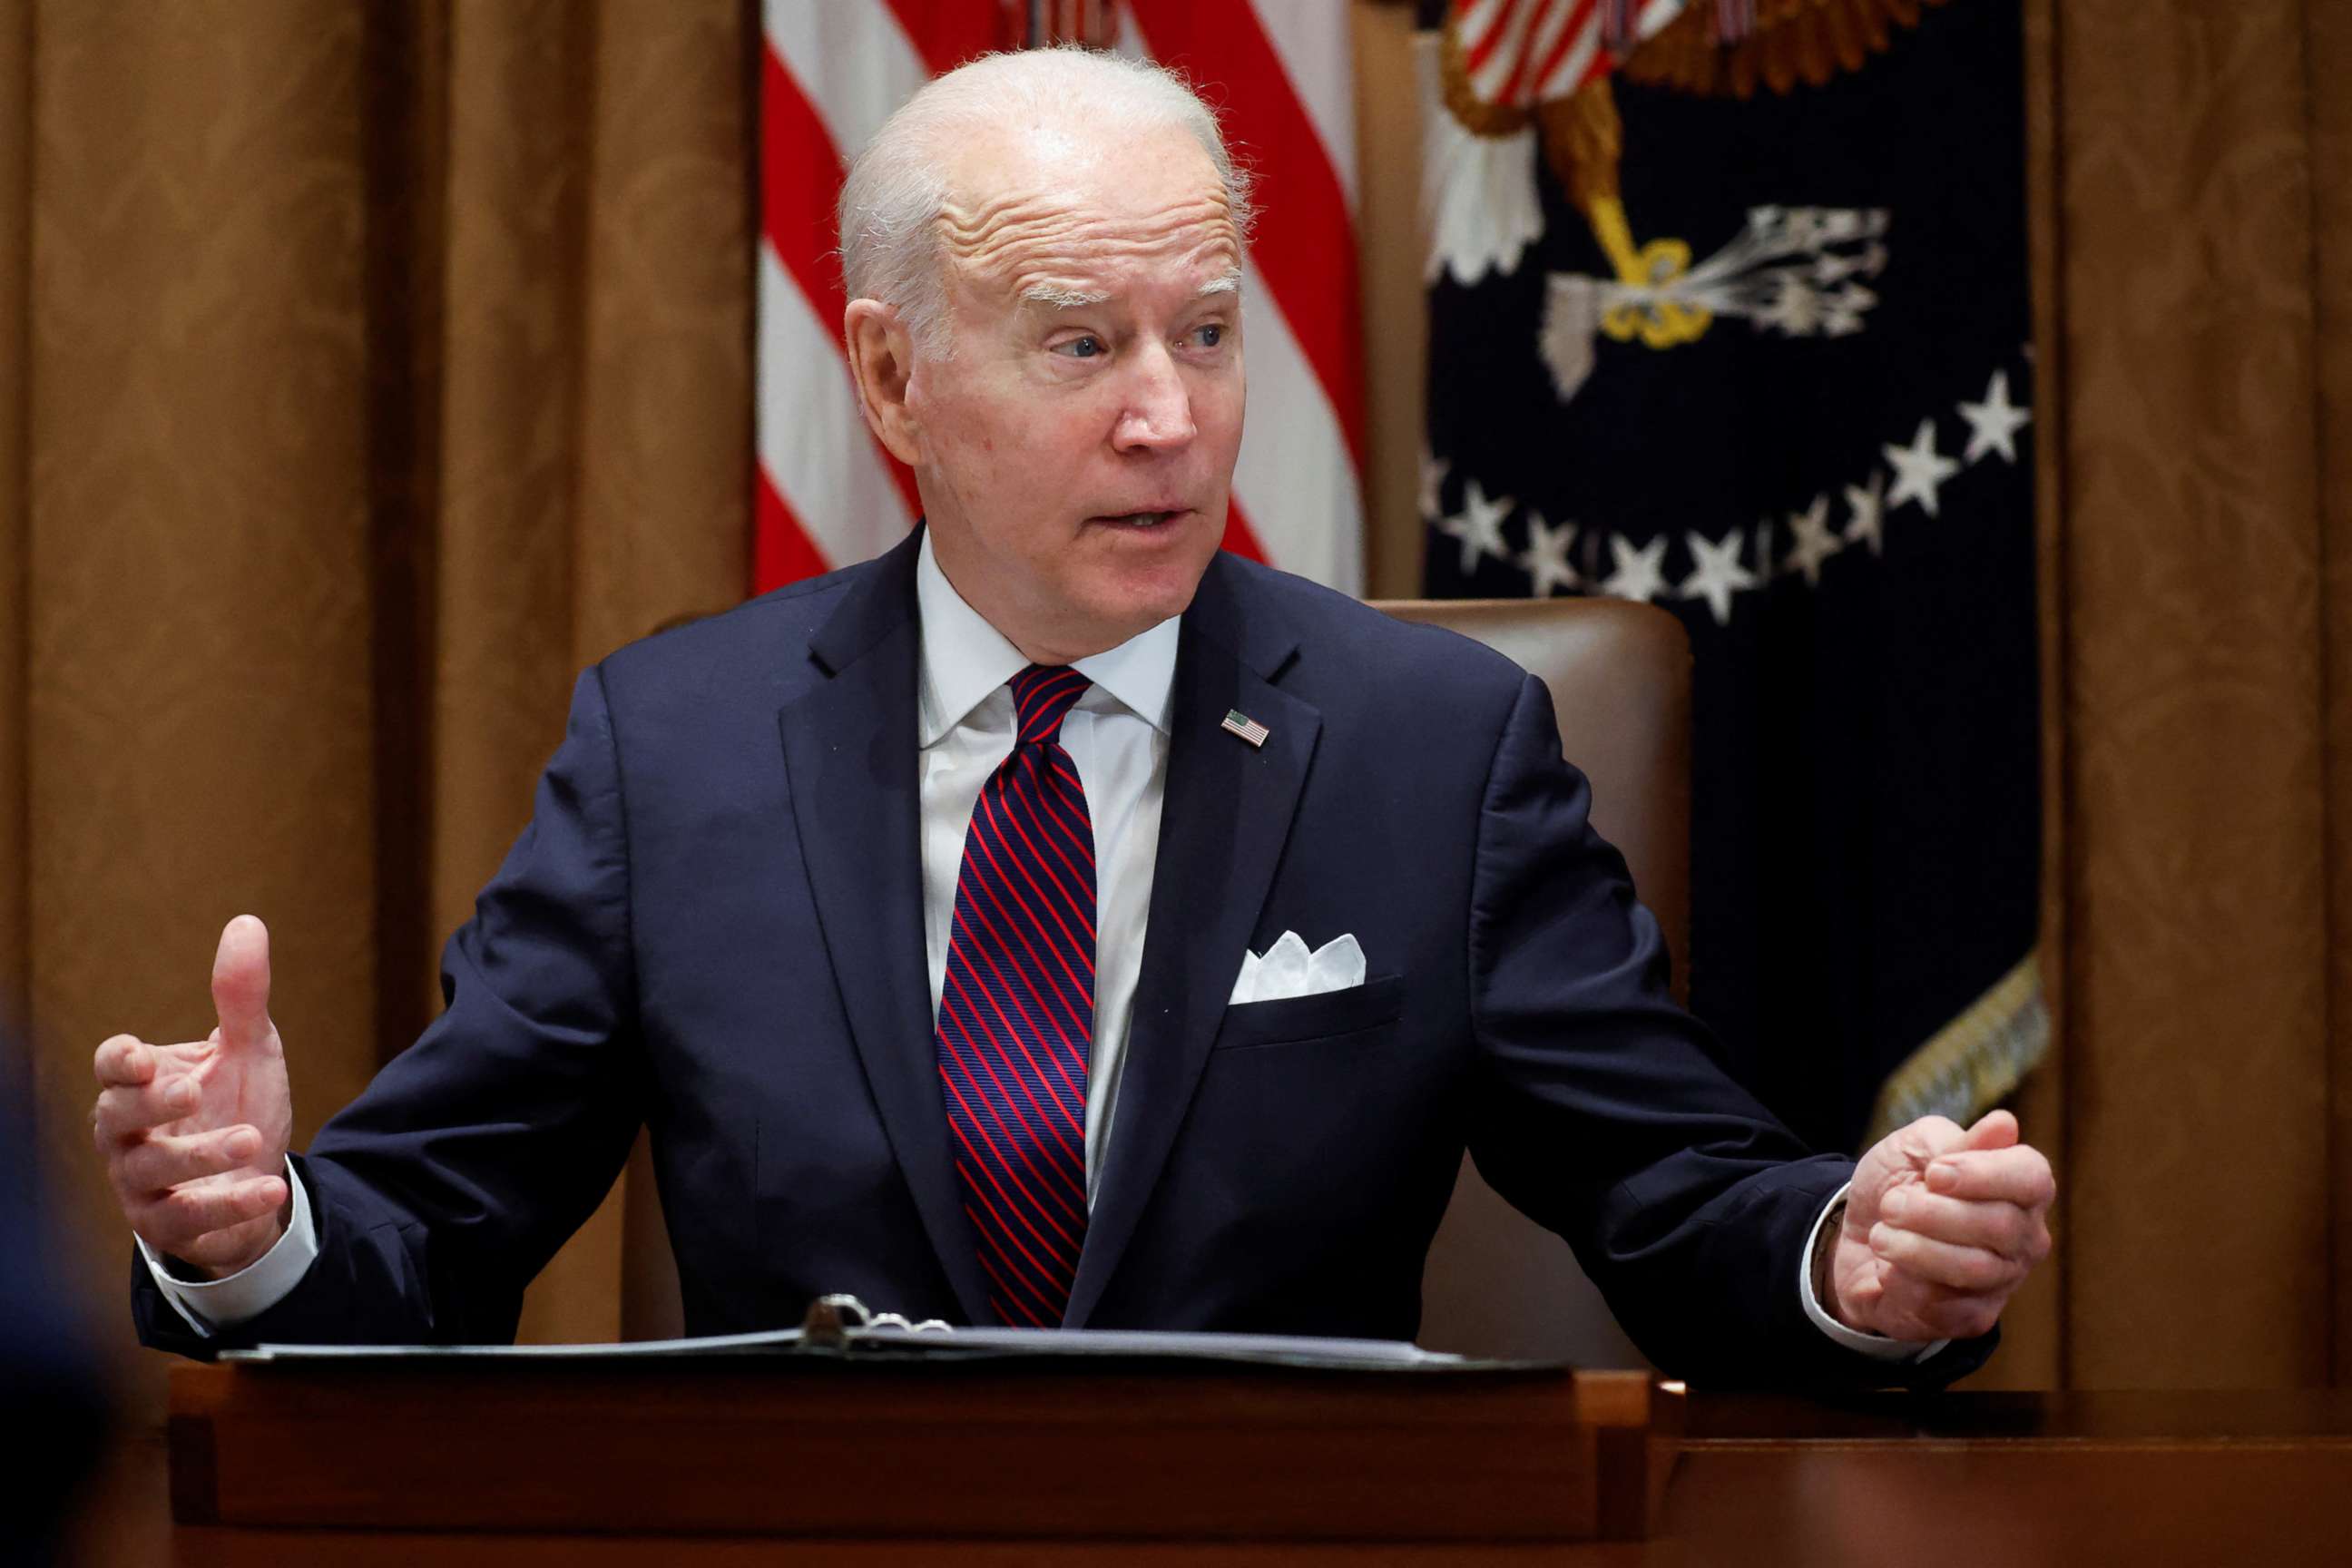 PHOTO: President Joe Biden gestures during a meeting with his Infrastructure Implementation Task Force in the Cabinet Room at the White House in Washington, D.C., Jan. 20, 2022.